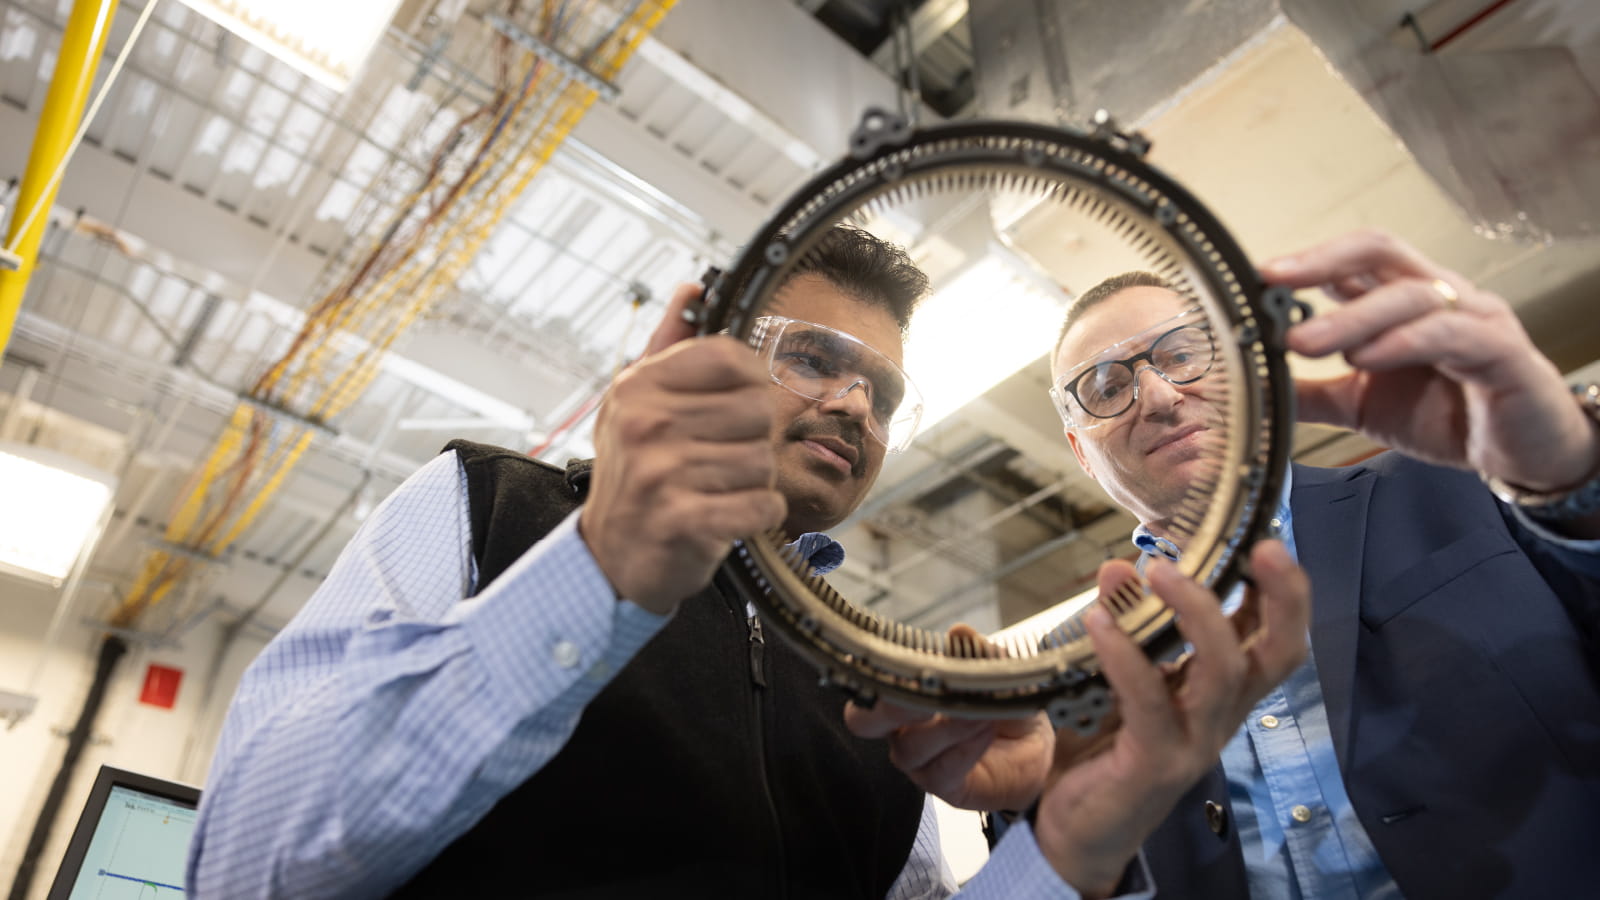 Two male Raytheon Technologies employees wearing protective eye shields holding and inspecting machinery together